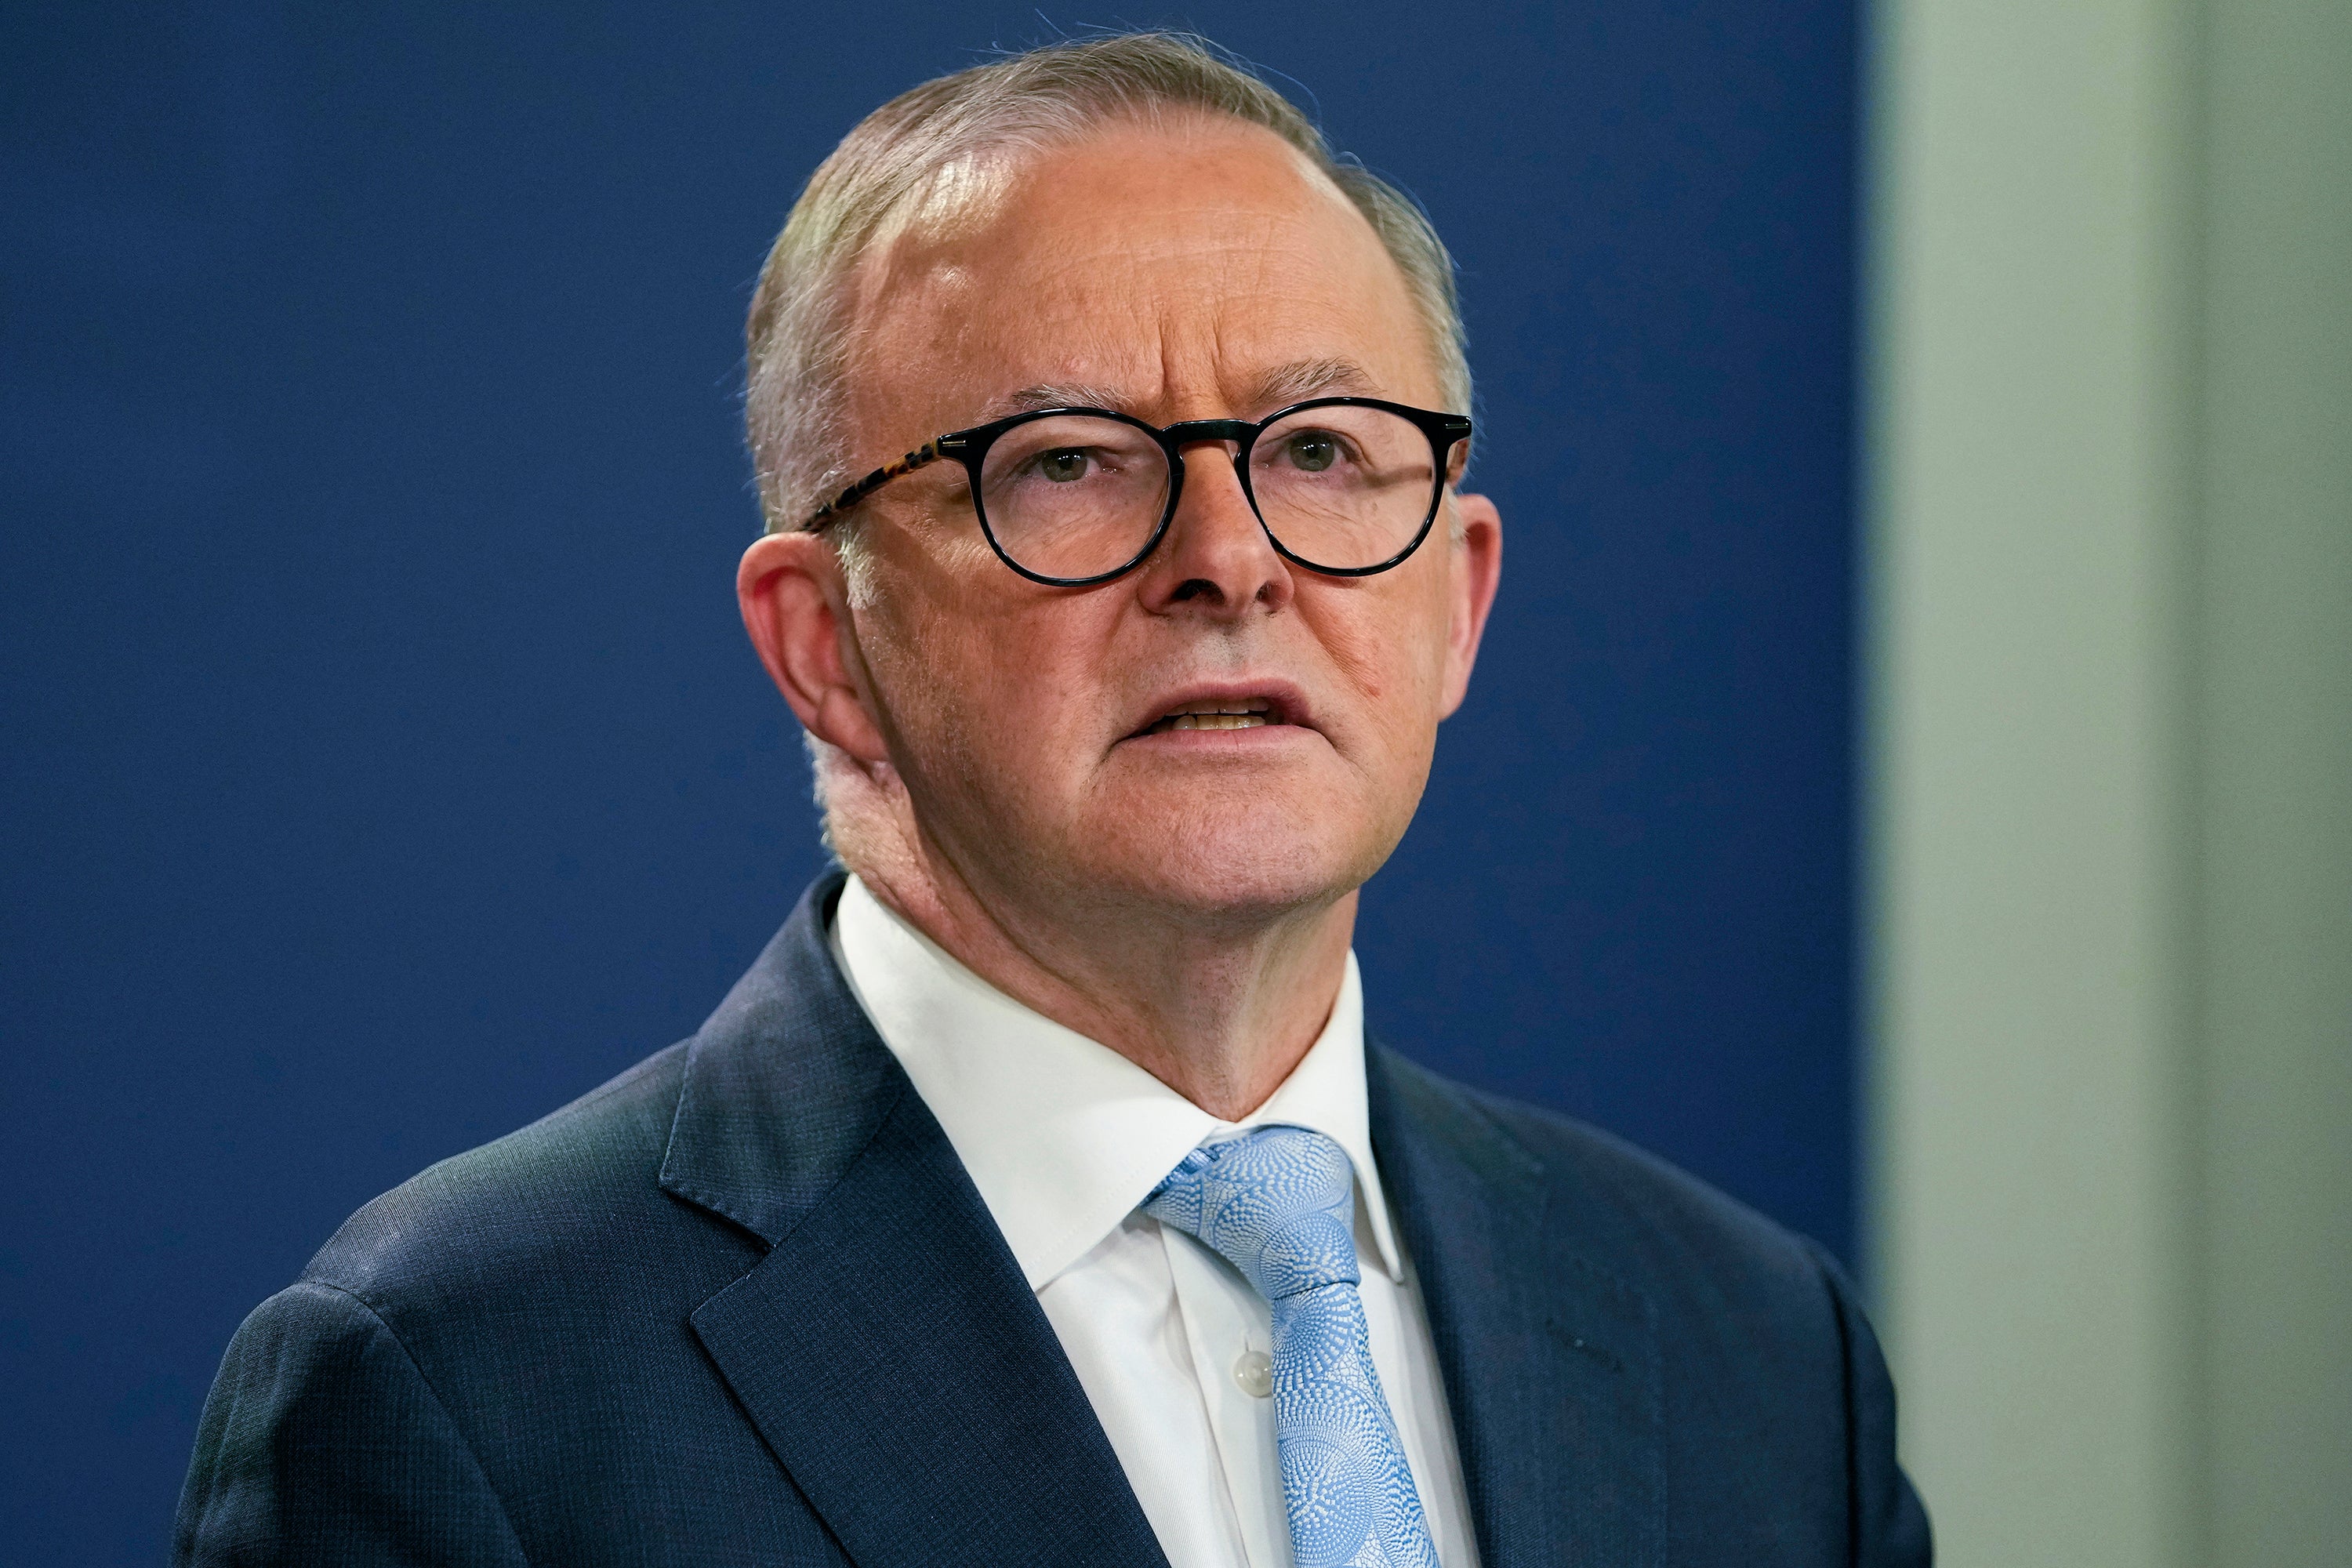 Anthony Albanese scrapped plans for a referendum on changing Australia’s head of state